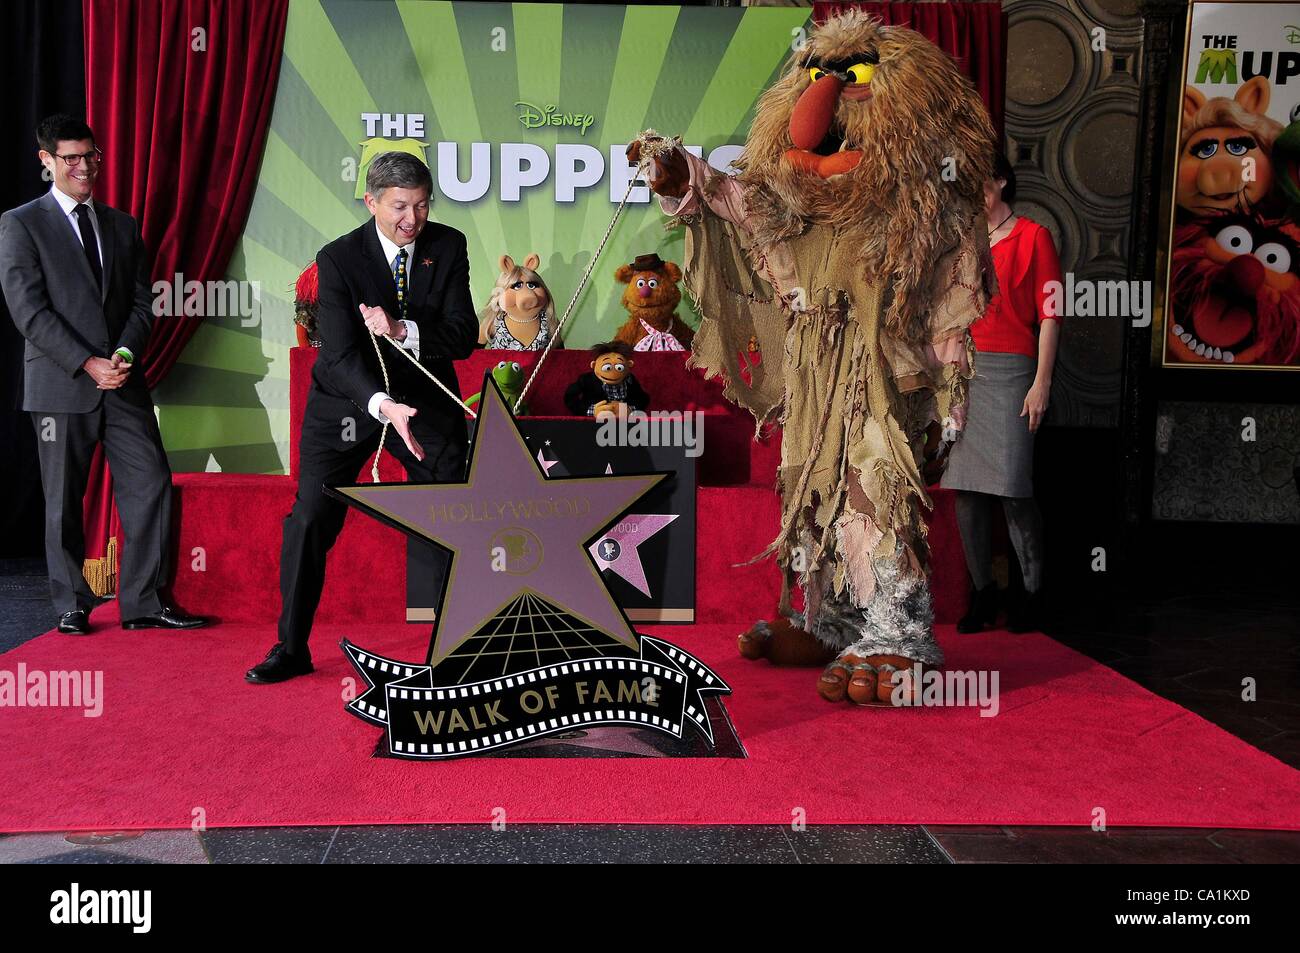 Rich Ross, Leron Gubler, Miss Piggy, Kermit, Walter, Fozzie, Sweetums at the induction ceremony for Star on the Hollywood Walk of Fame forThe Muppets, Hollywood Boulevard, Los Angeles, CA March 20, 2012. Photo By: Michael Germana/Everett Collection Stock Photo